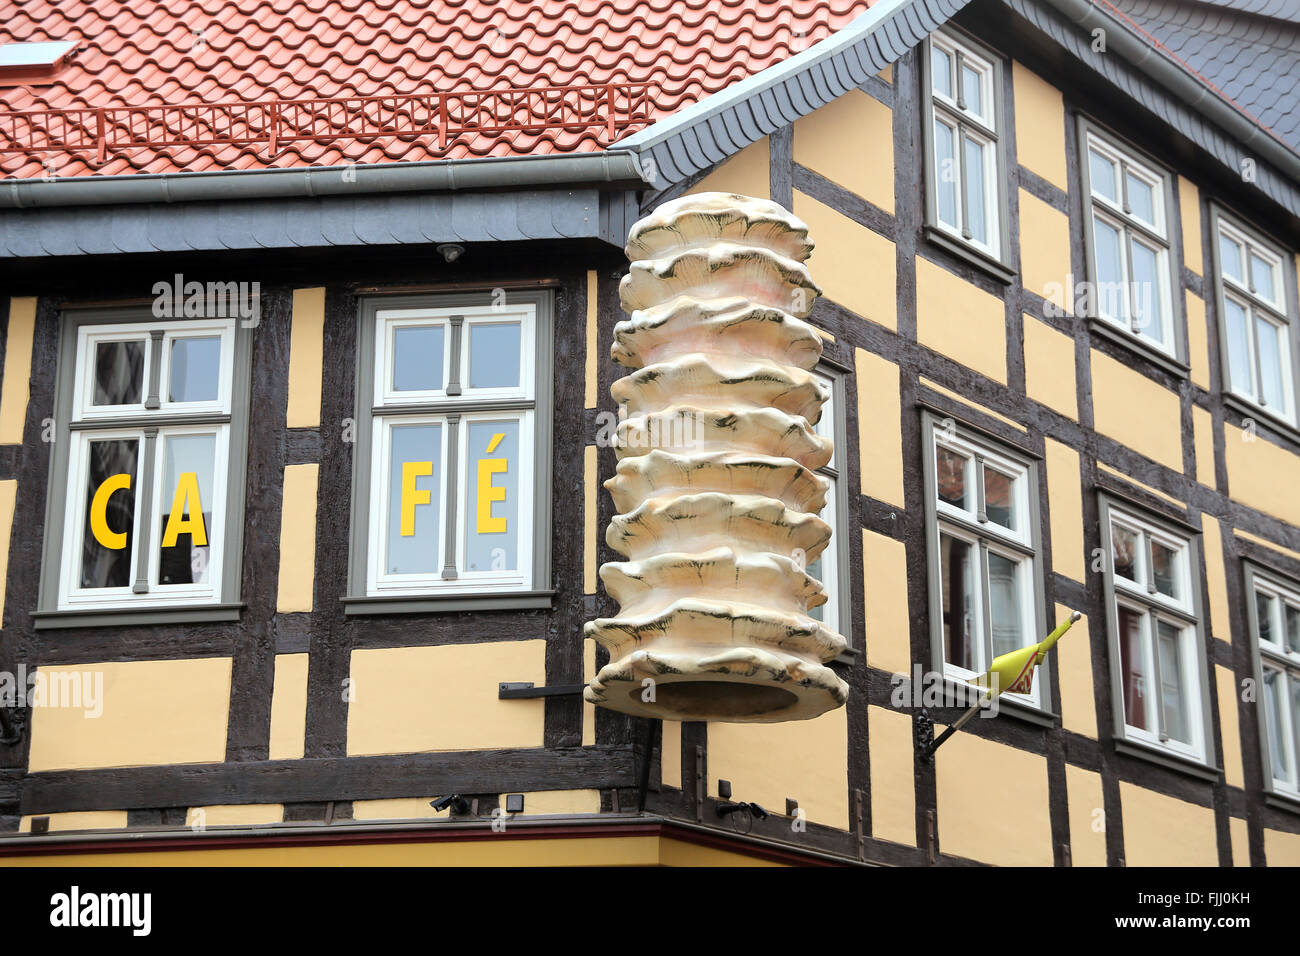 Giant model of a Baumkuchen (tree cake) at Cafe Kruse, manufactury of local specialtity Baumkuchen. Salzwedel, Altmark, Sachsen Anhalt, Germany, Europe Stock Photo